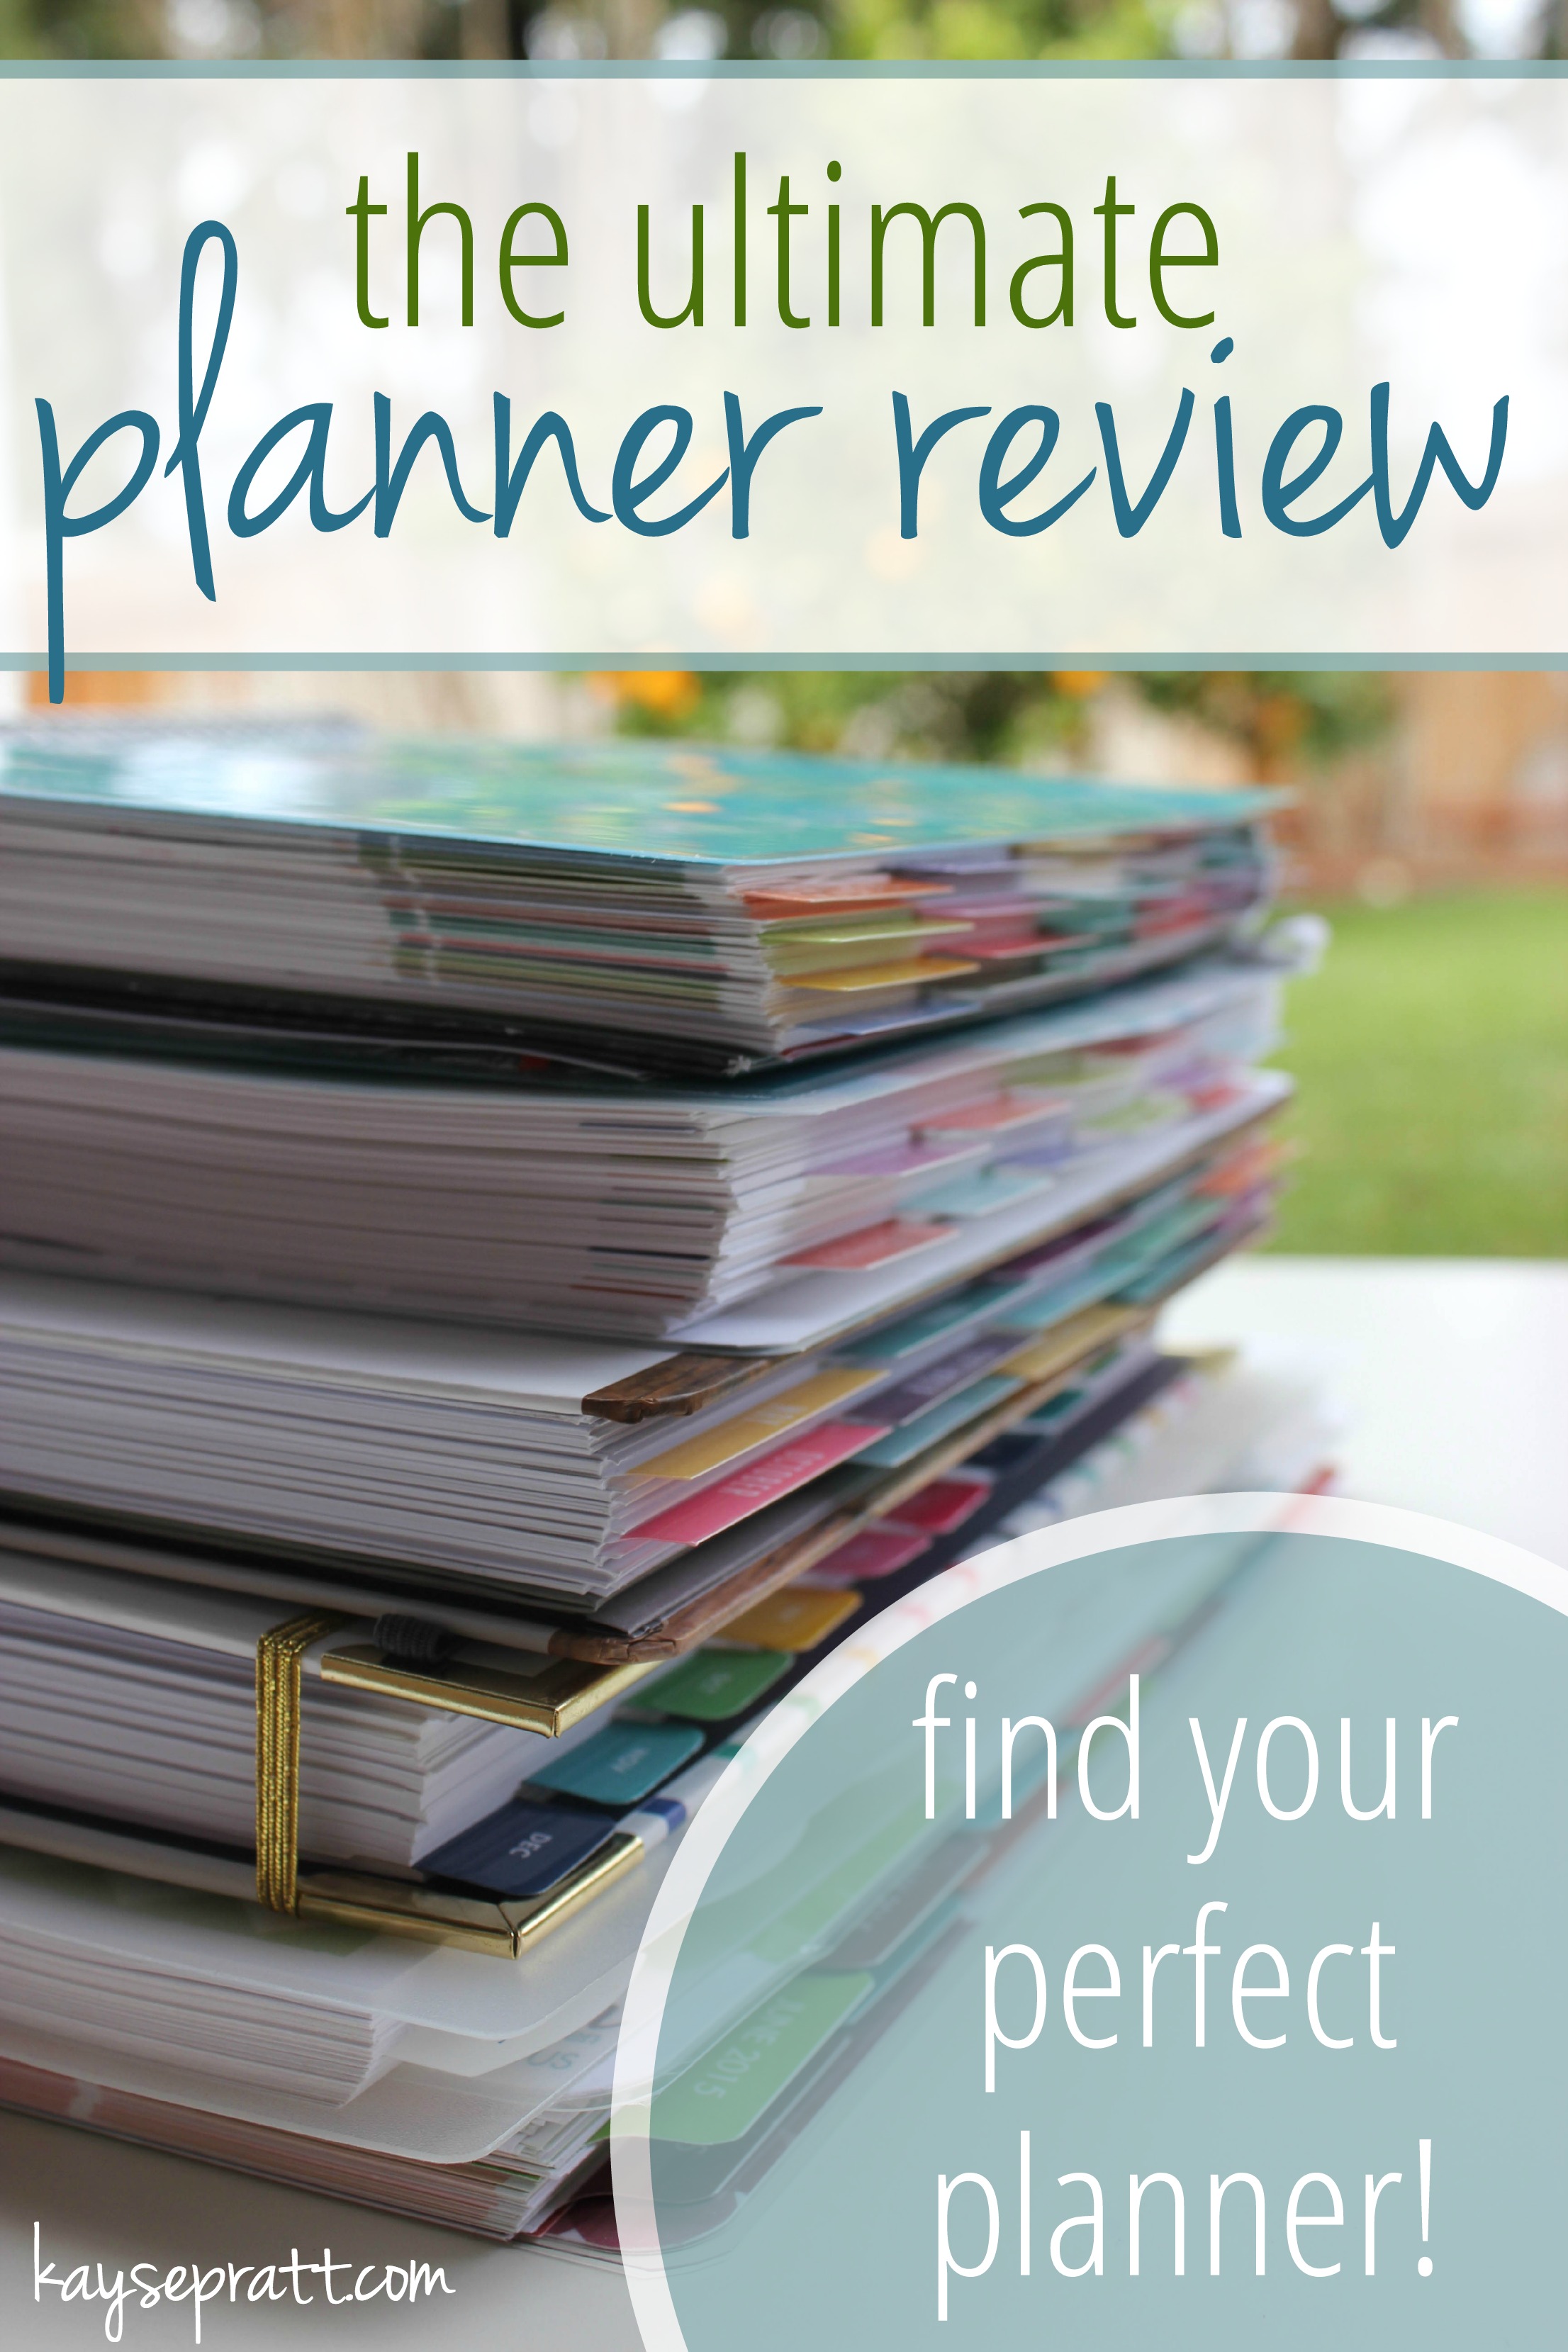 The Ultimate Planner Review